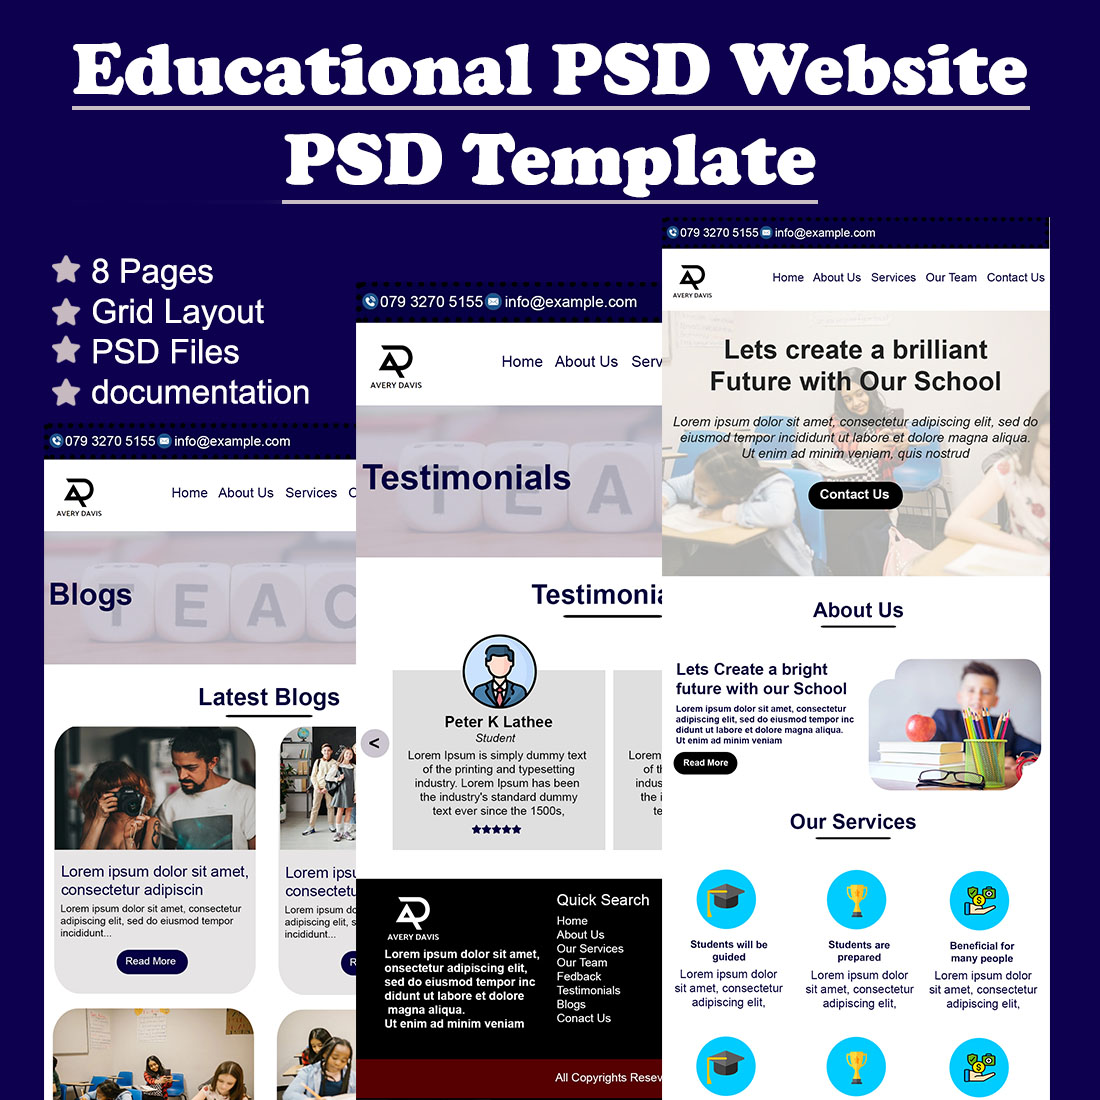 Educational PSD Website - PSD Template preview image.